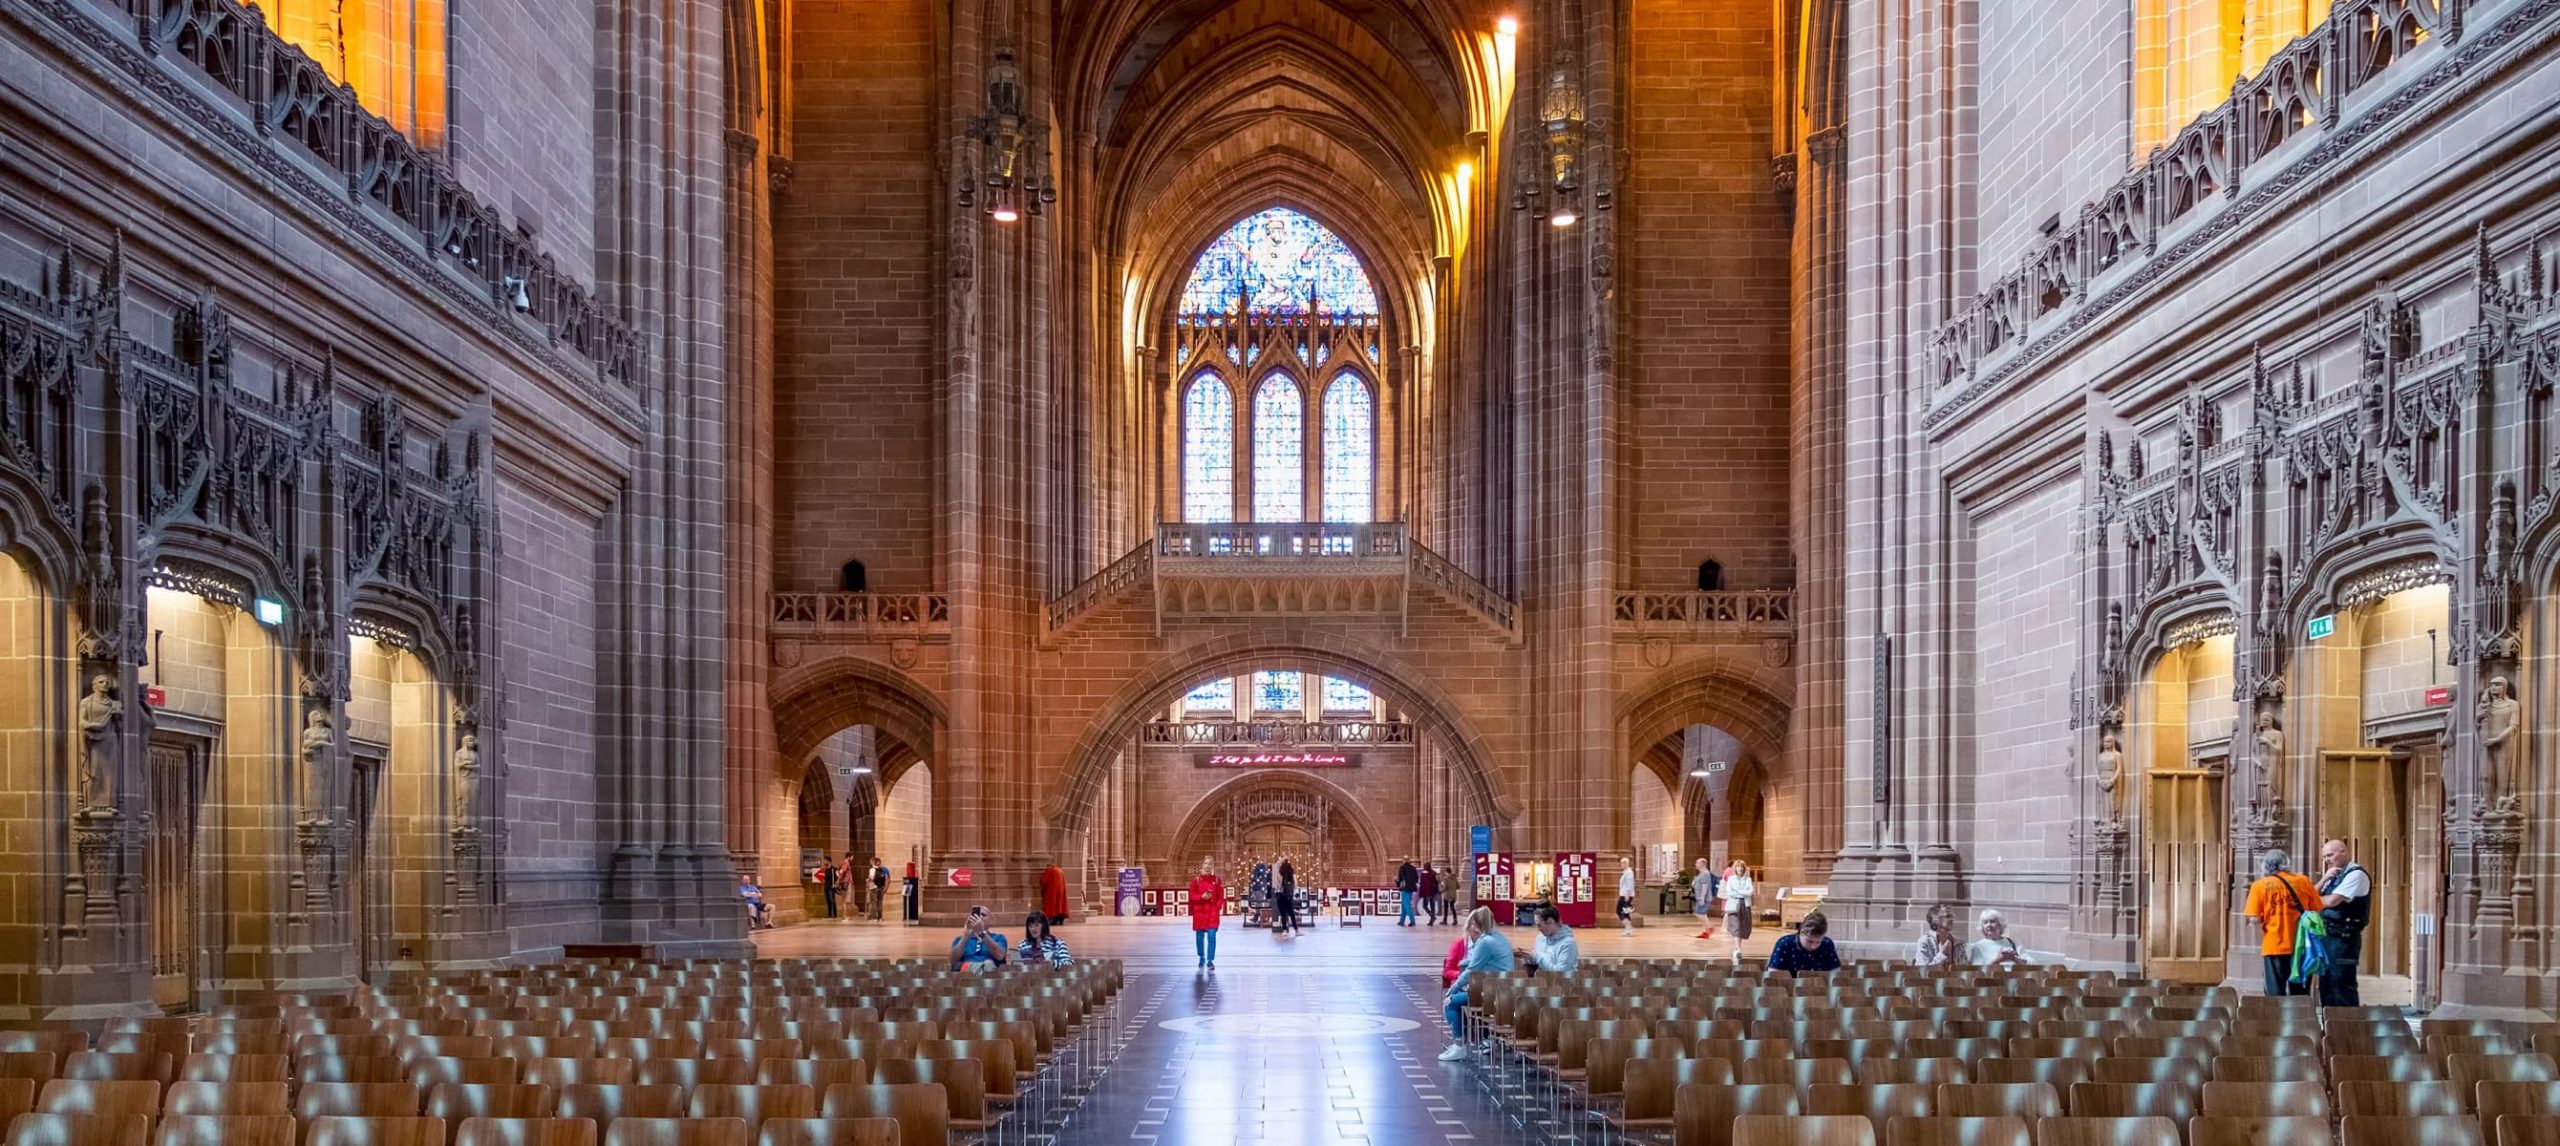 inside the Liverpool Cathedral